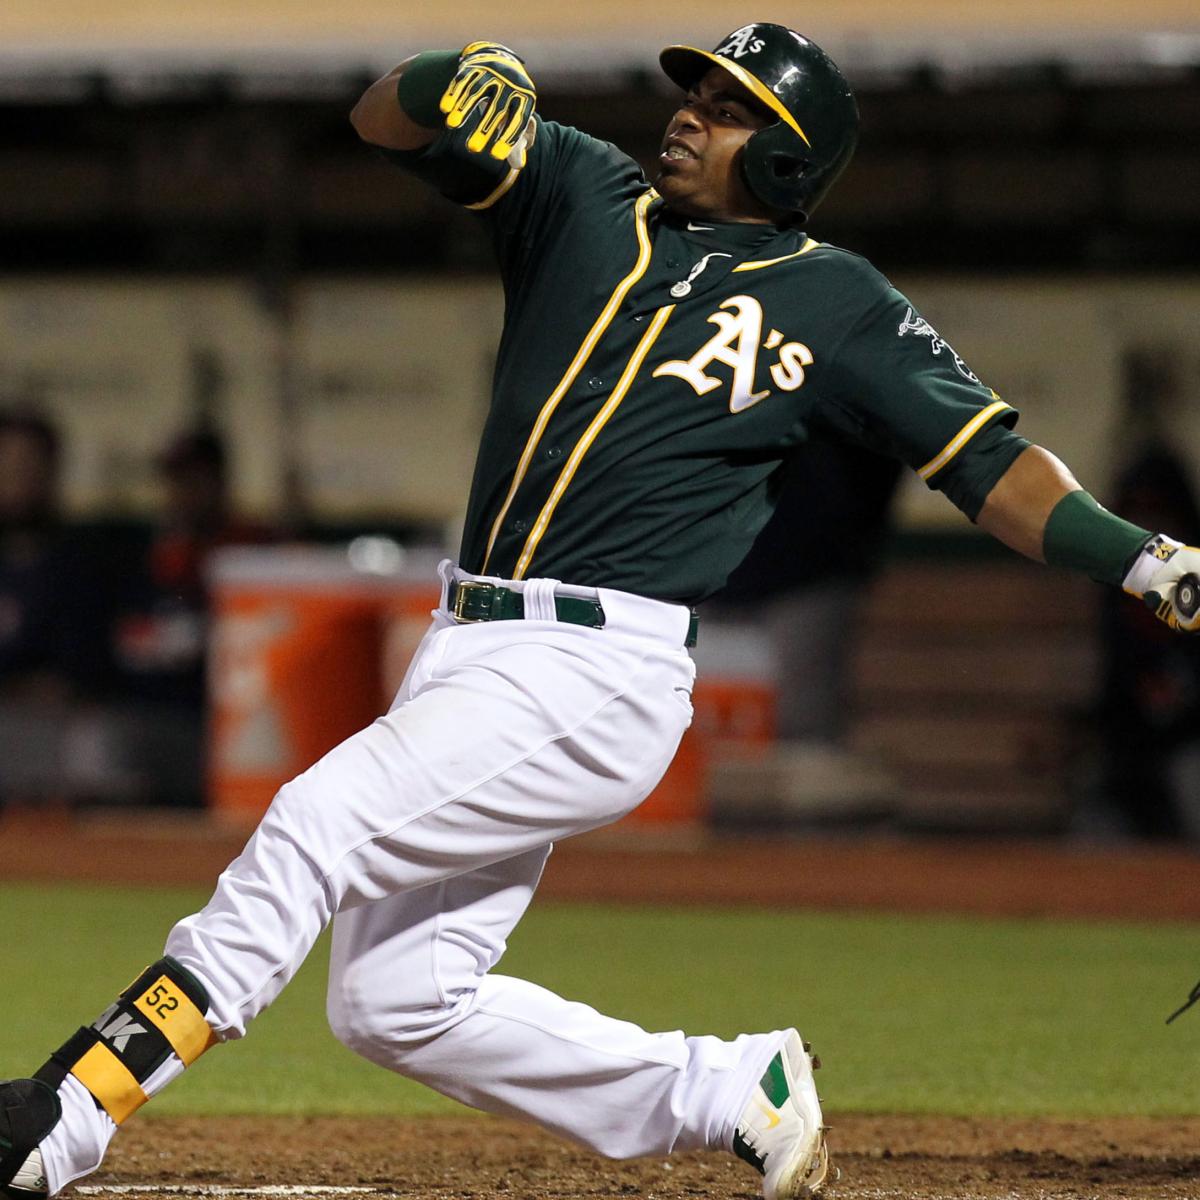 Yoenis Cespedes Rumors: Is A's Star Worth a Blockbuster Trade